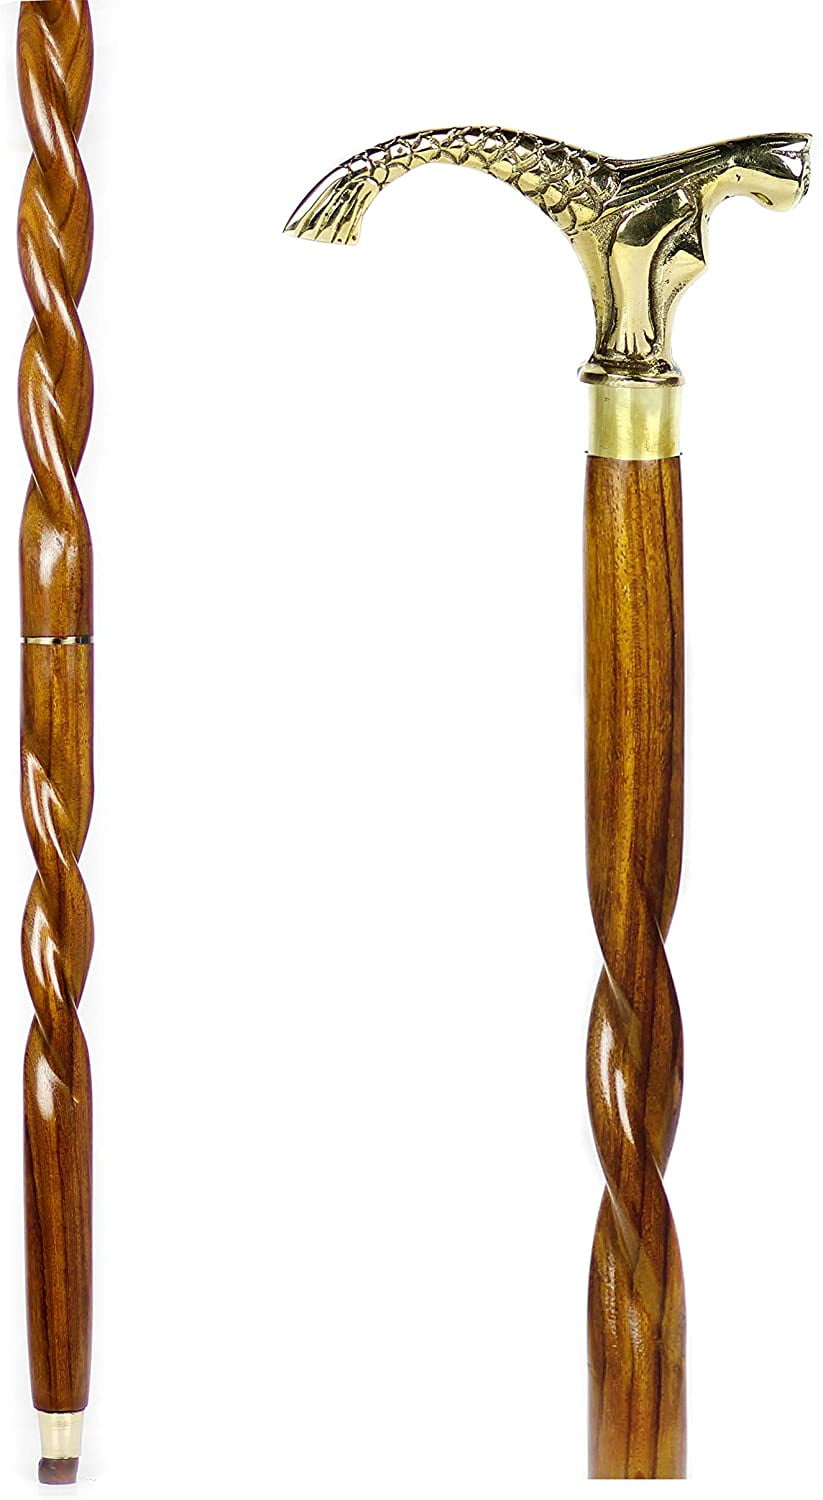 SPIRAL ROPE STYLE VINTAGE SOLID VICTORIAN BRASS COBRA WOODEN WALKING CANE GIFT 